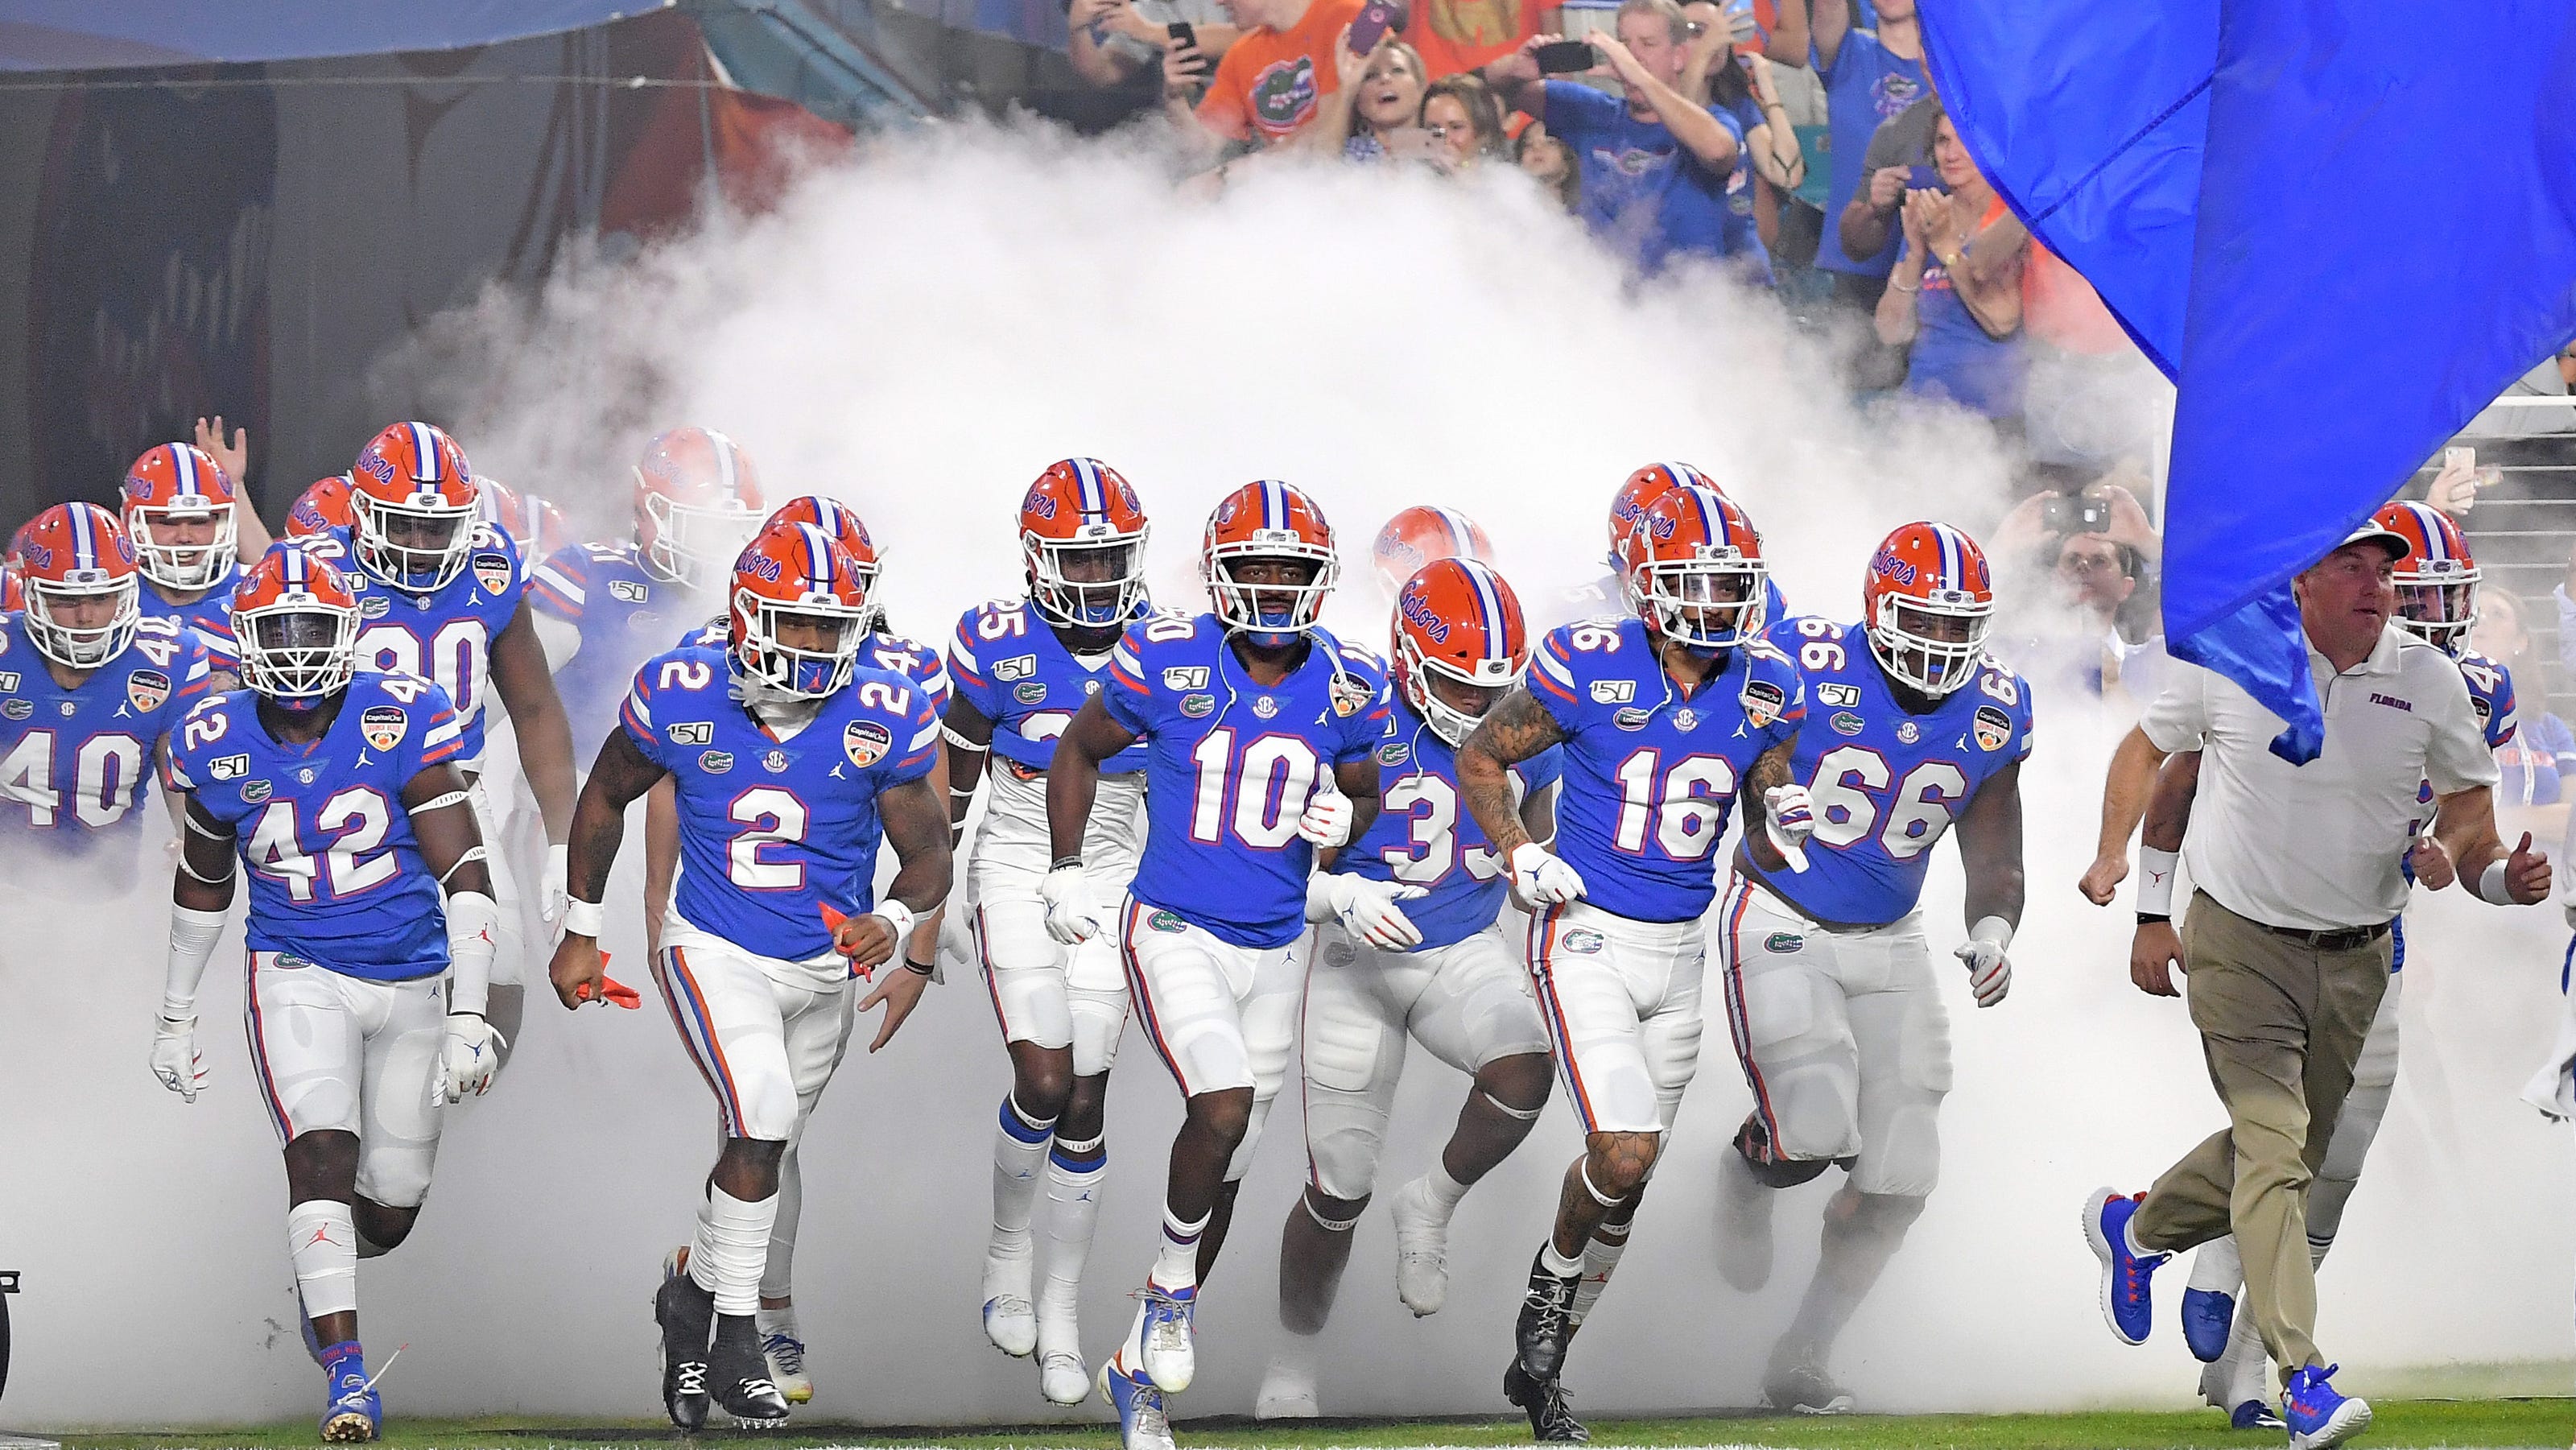 Florida edges out UCF as best college football team in the state